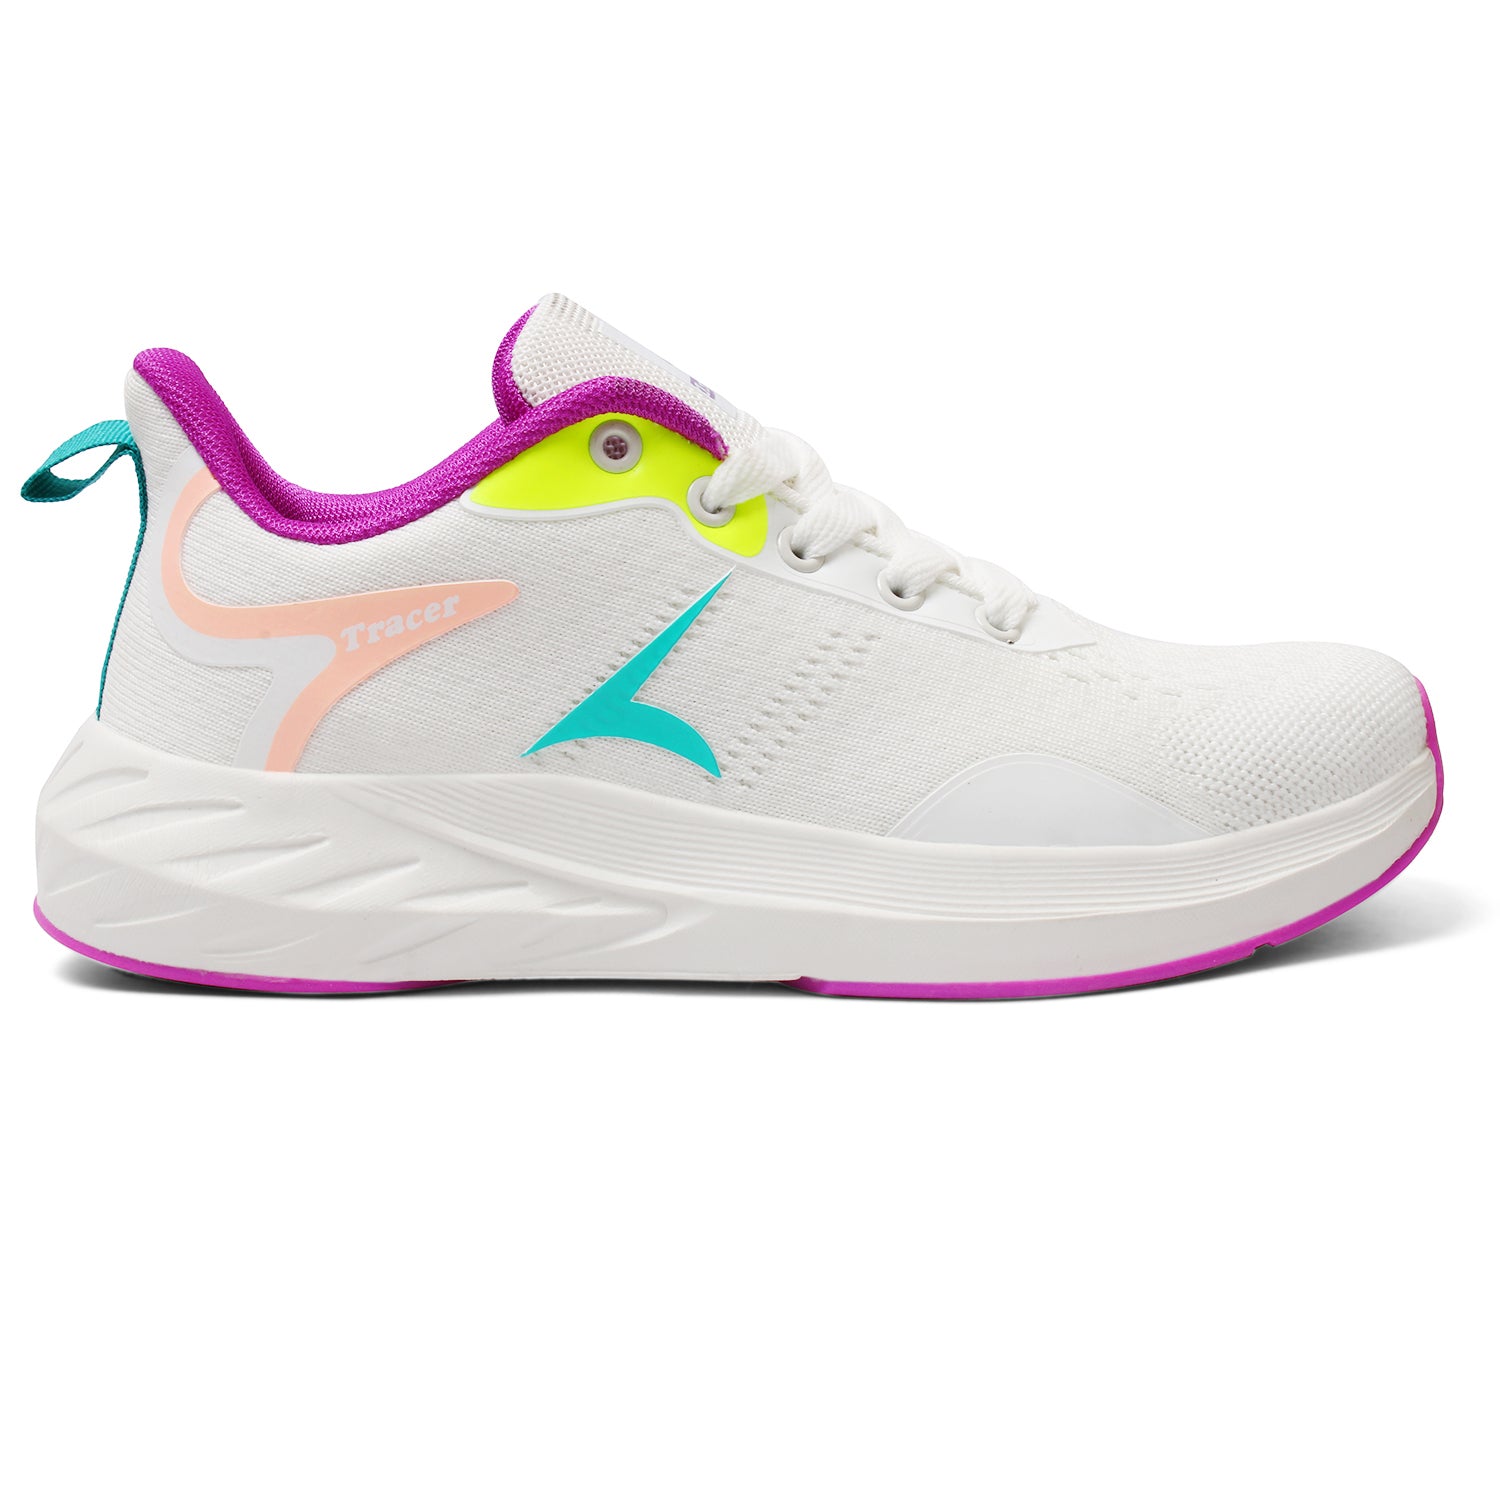 Tracer India Aurora-L-2237 Sneakers for Women's White